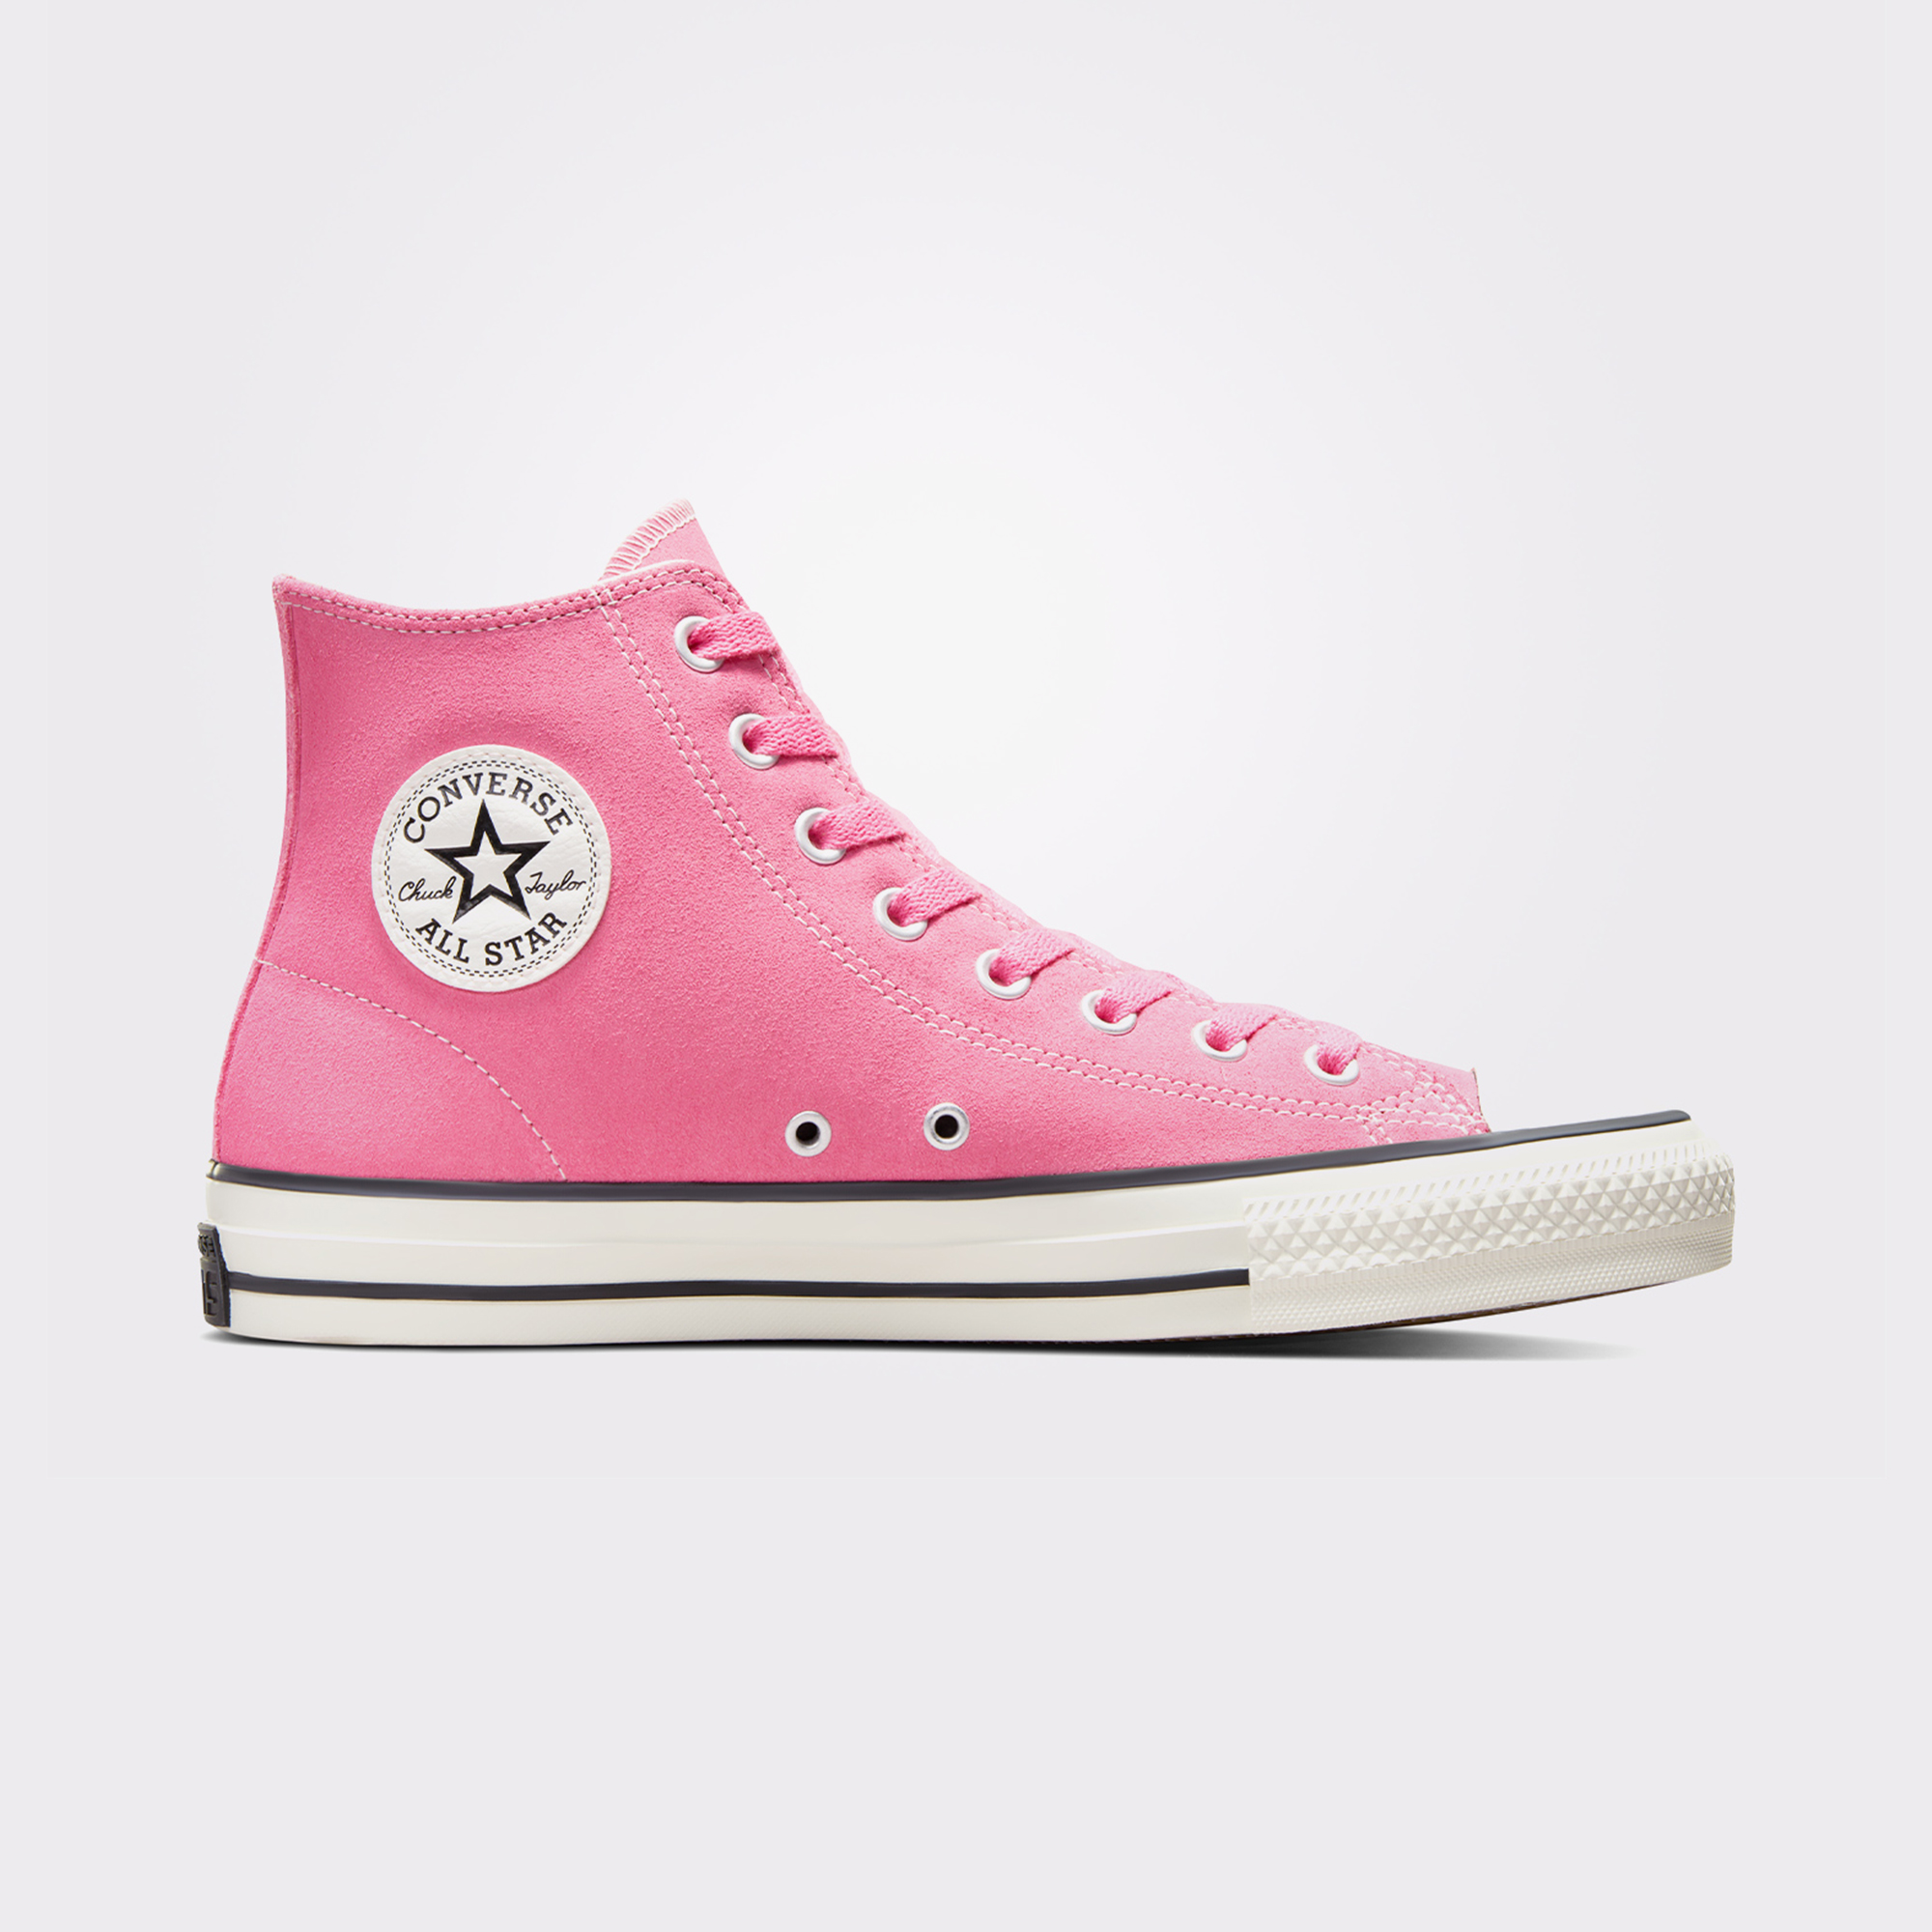 Converse Chuck Taylor All Star Pro Suede Unisex Pembe Sneaker